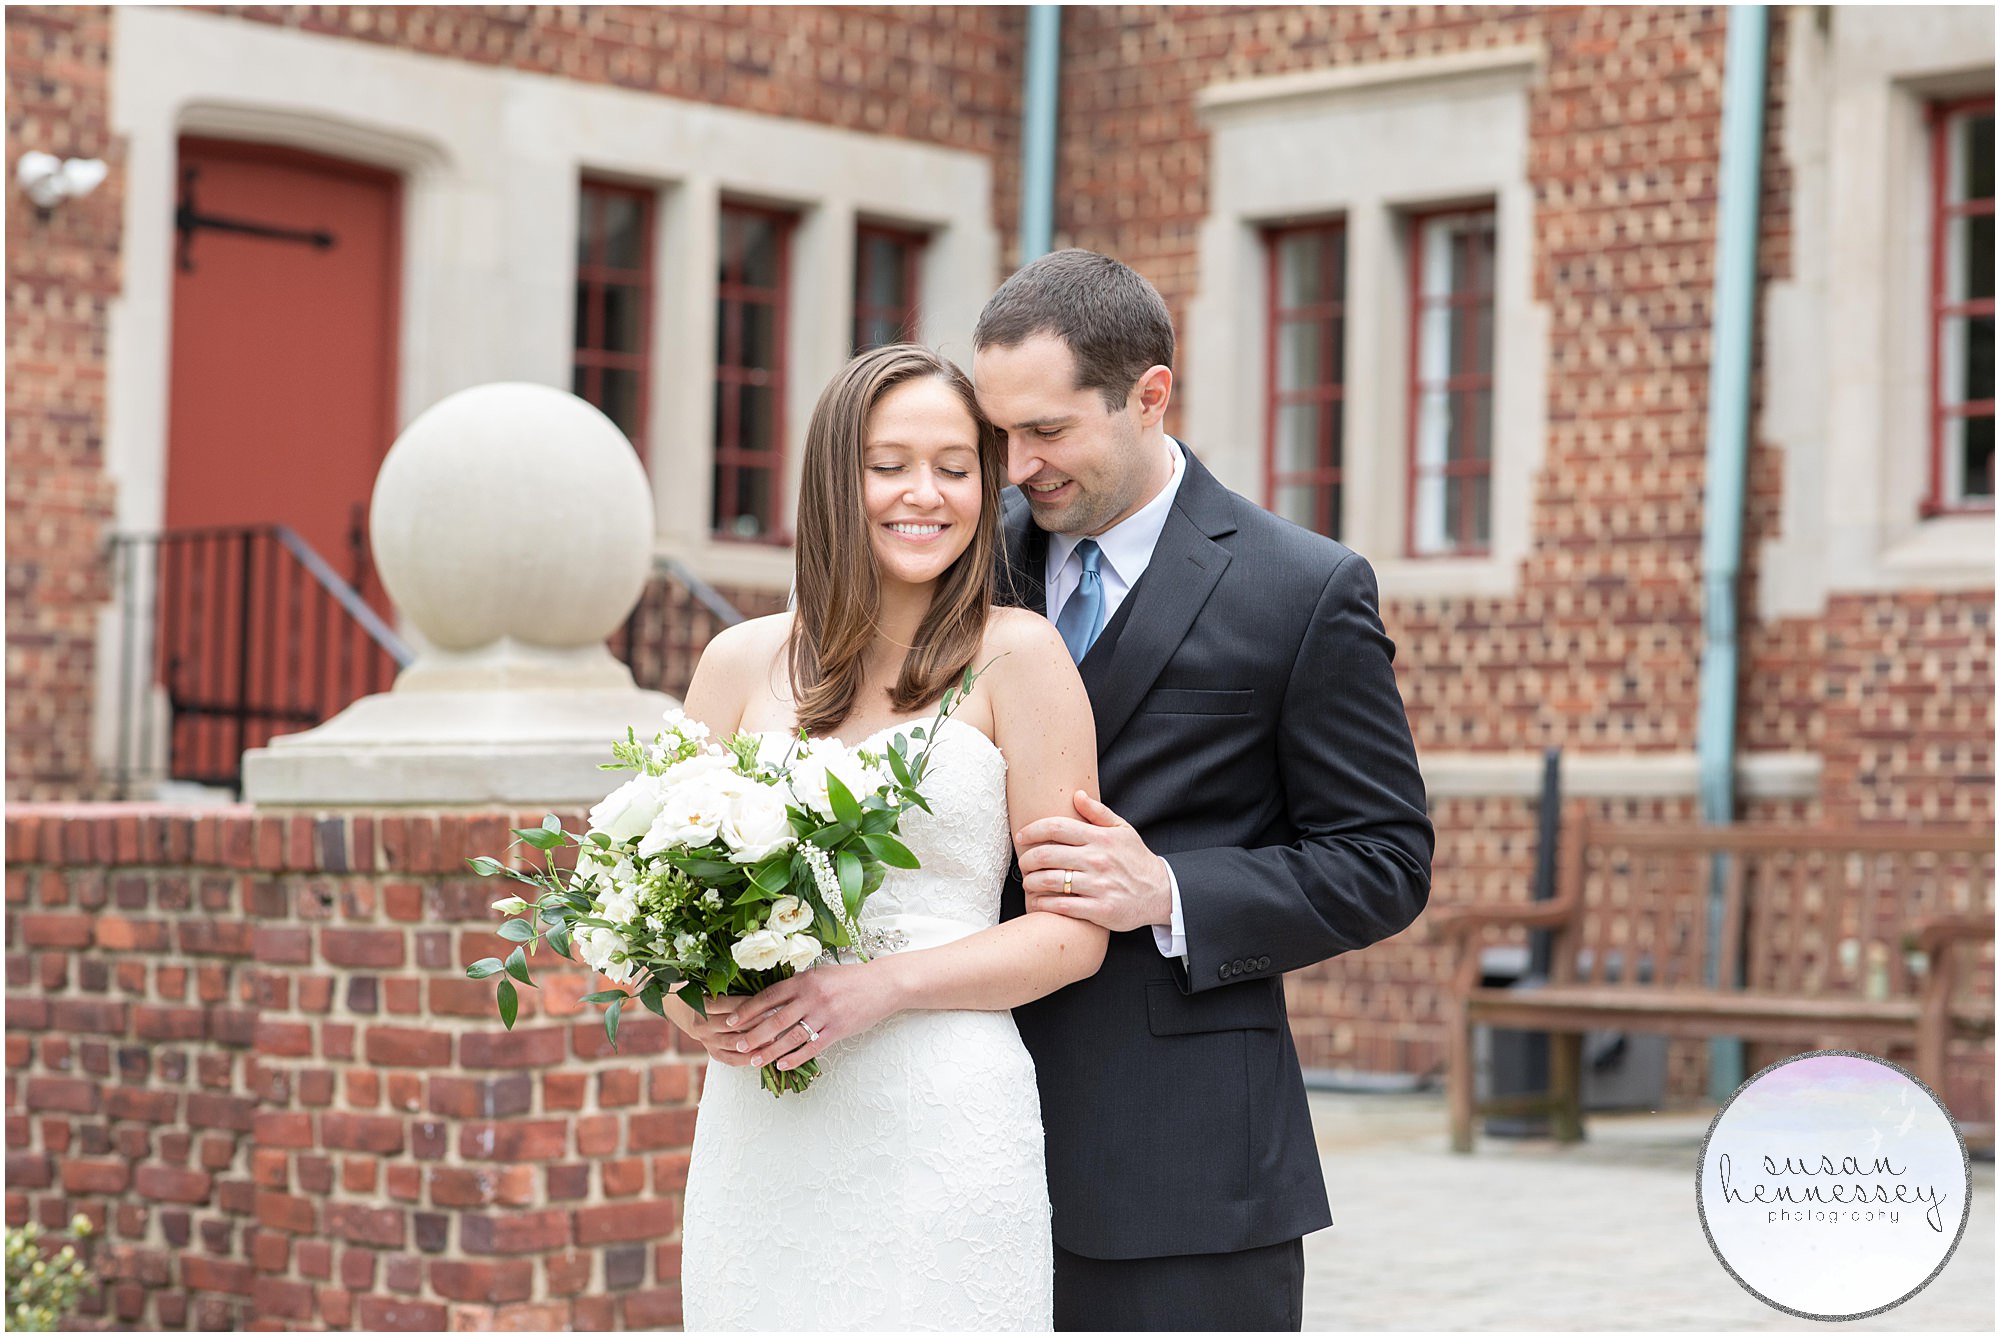 Bride and groom at their NJ Micro Wedding with Portraits at Community House of Moorestown